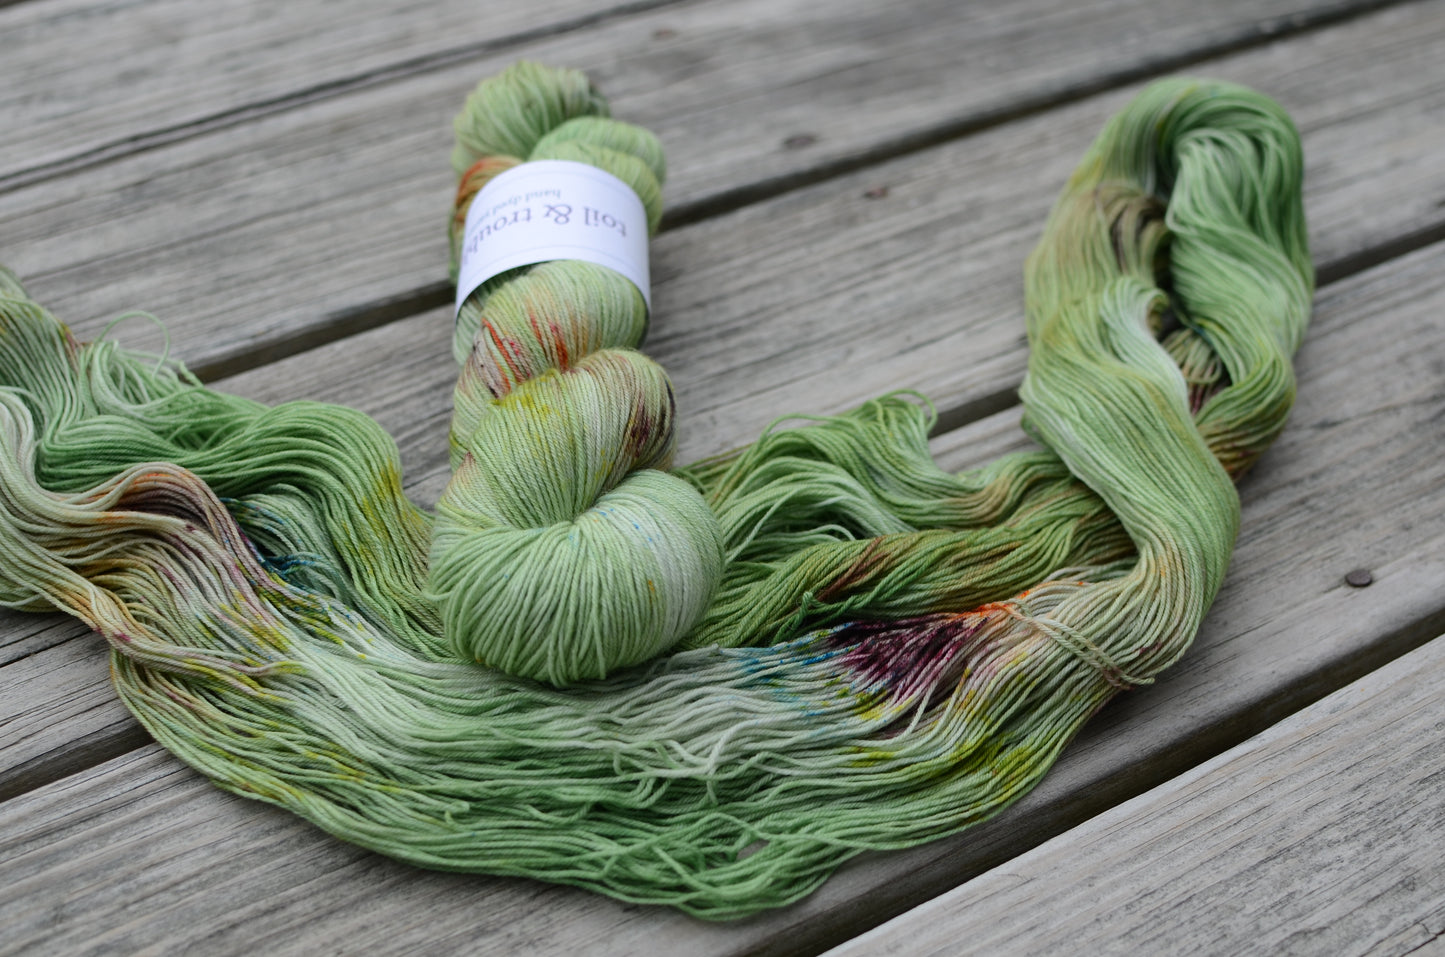 Toil & Trouble Hand Dyed Yarn - Classic Sock